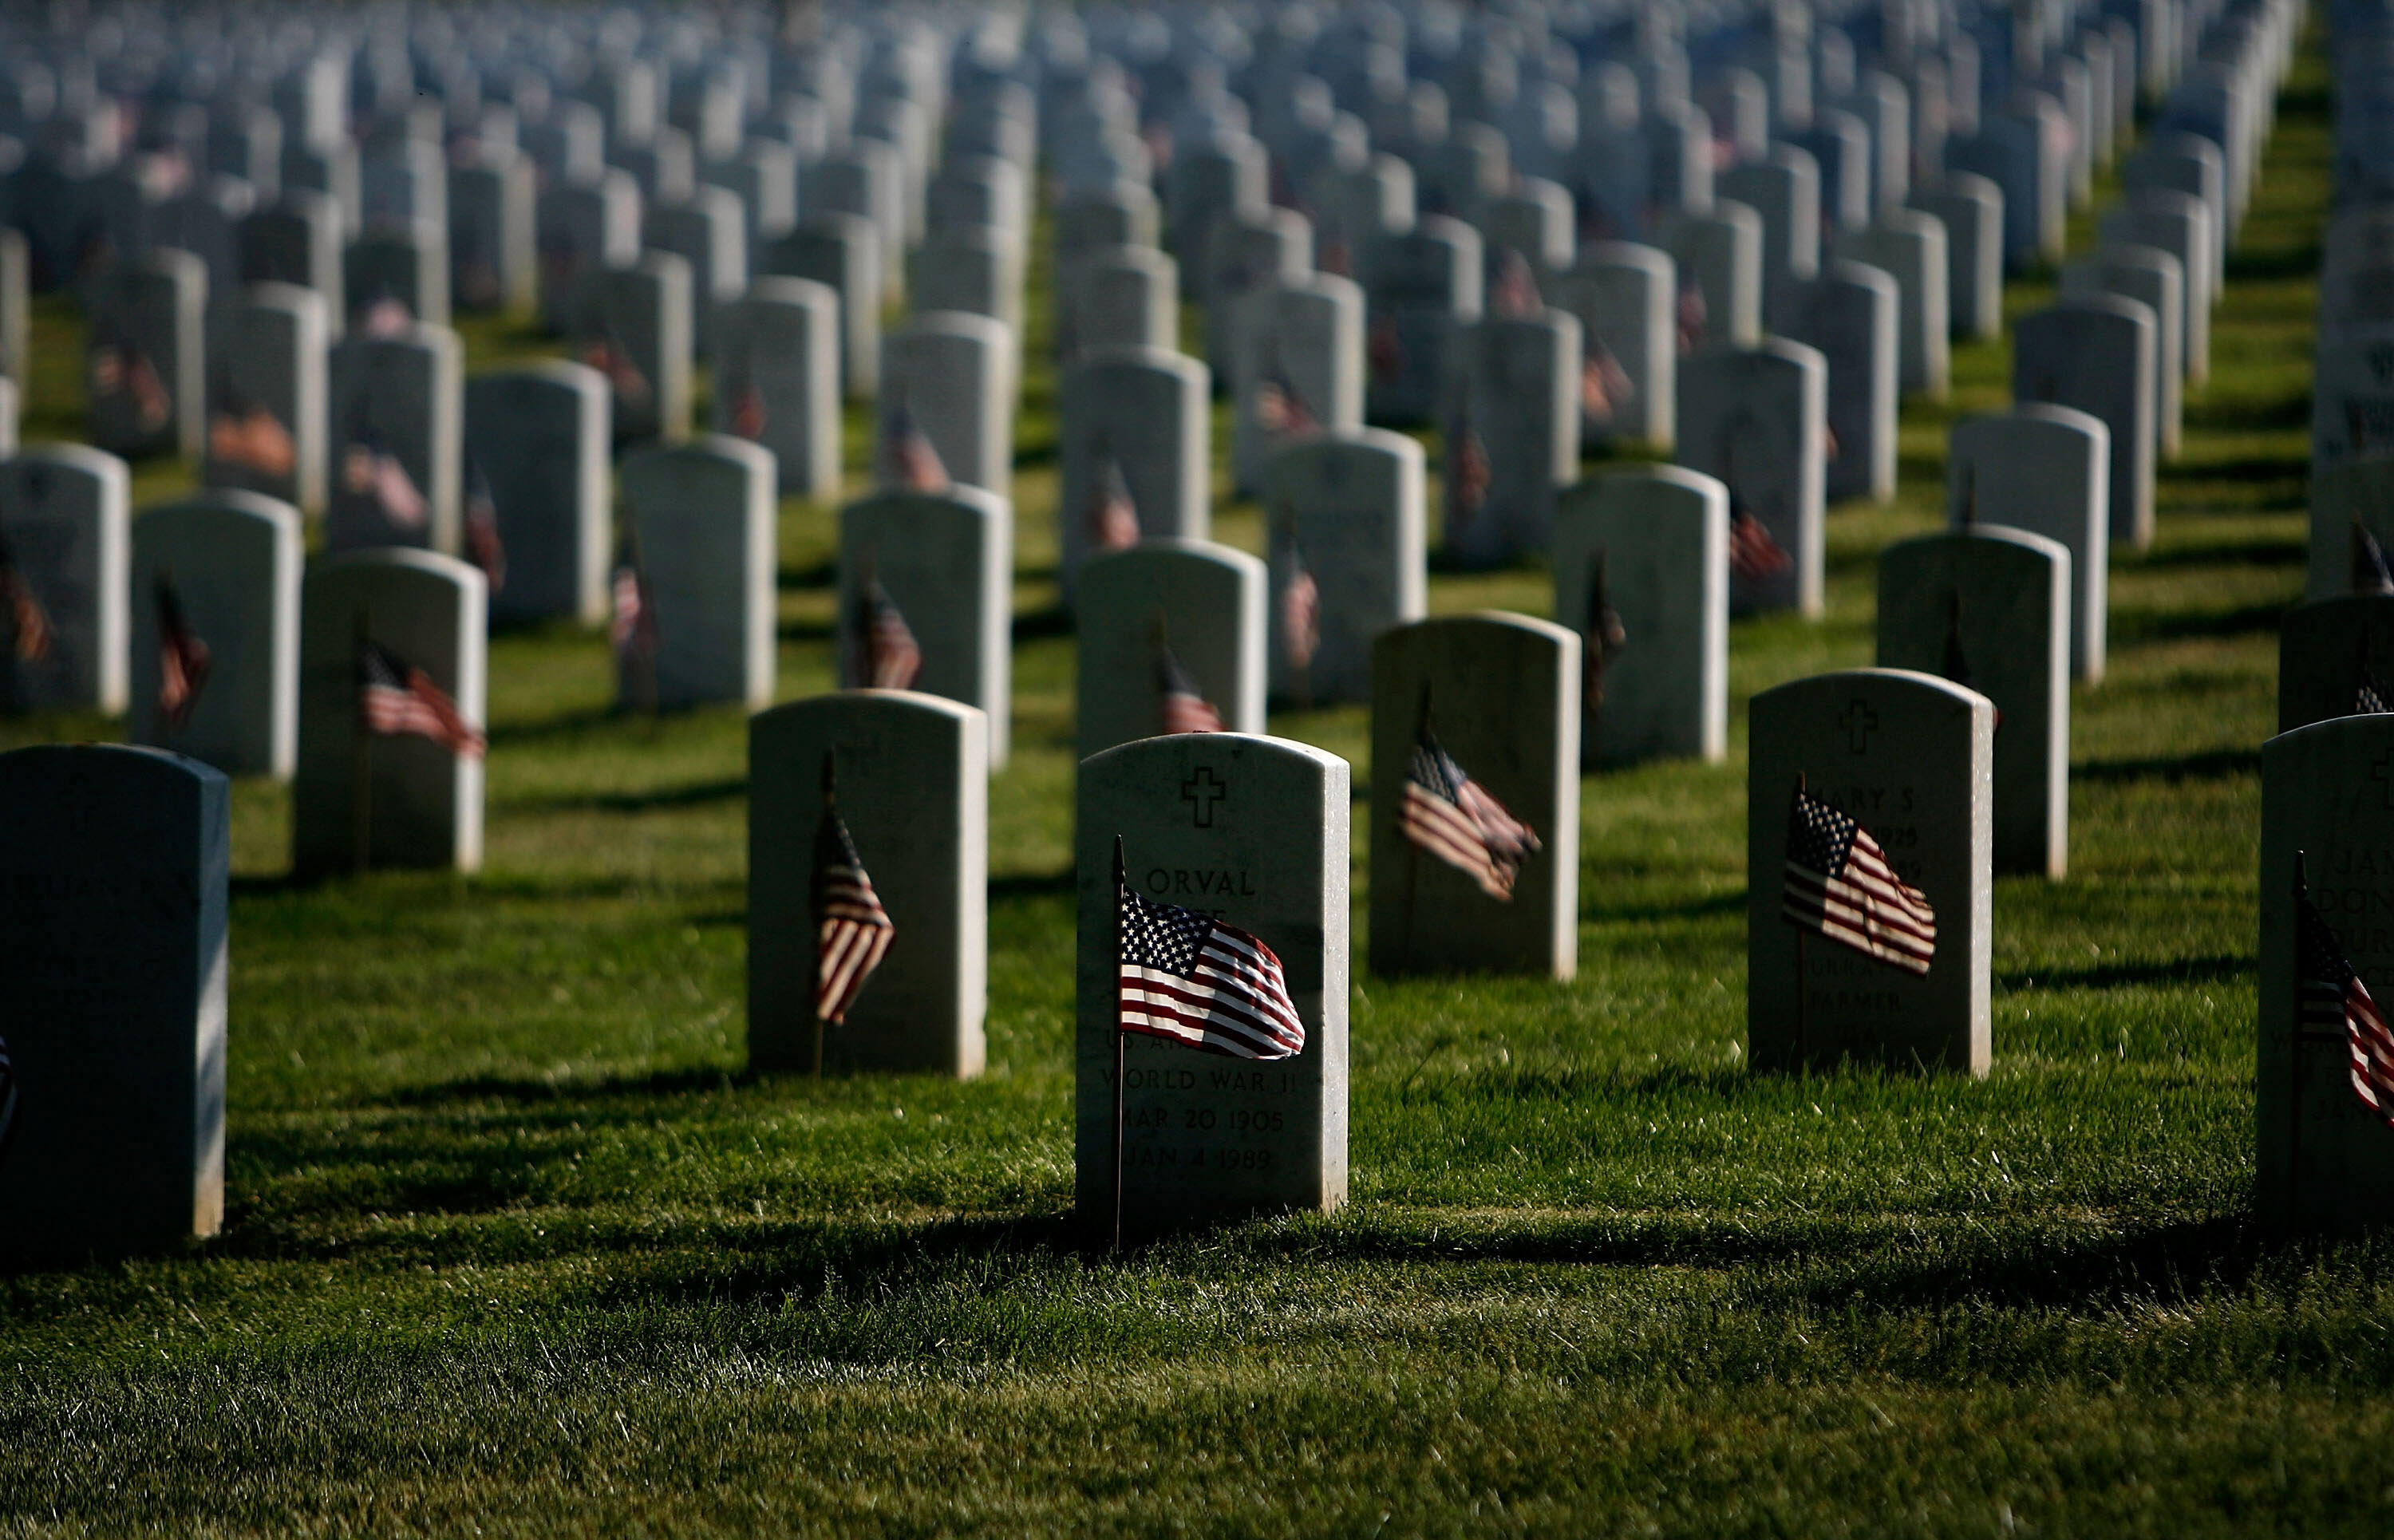 ARLINGTON, VA - MAY 24:  Small US flags wave in the wind after being placed in front of headstones at Arlington National Cemetery during the Flag-In Ceremony ahead of the Memorial Day weekend May 24, 2007 in Arlington, Virginia. It took approximately 3 hours for 1,300 soldiers, sailors and marines to put more than 300,000 flags in front of each of the gravestones at Arlington National Cemetery.  (Photo by Chip Somodevilla/Getty Images)